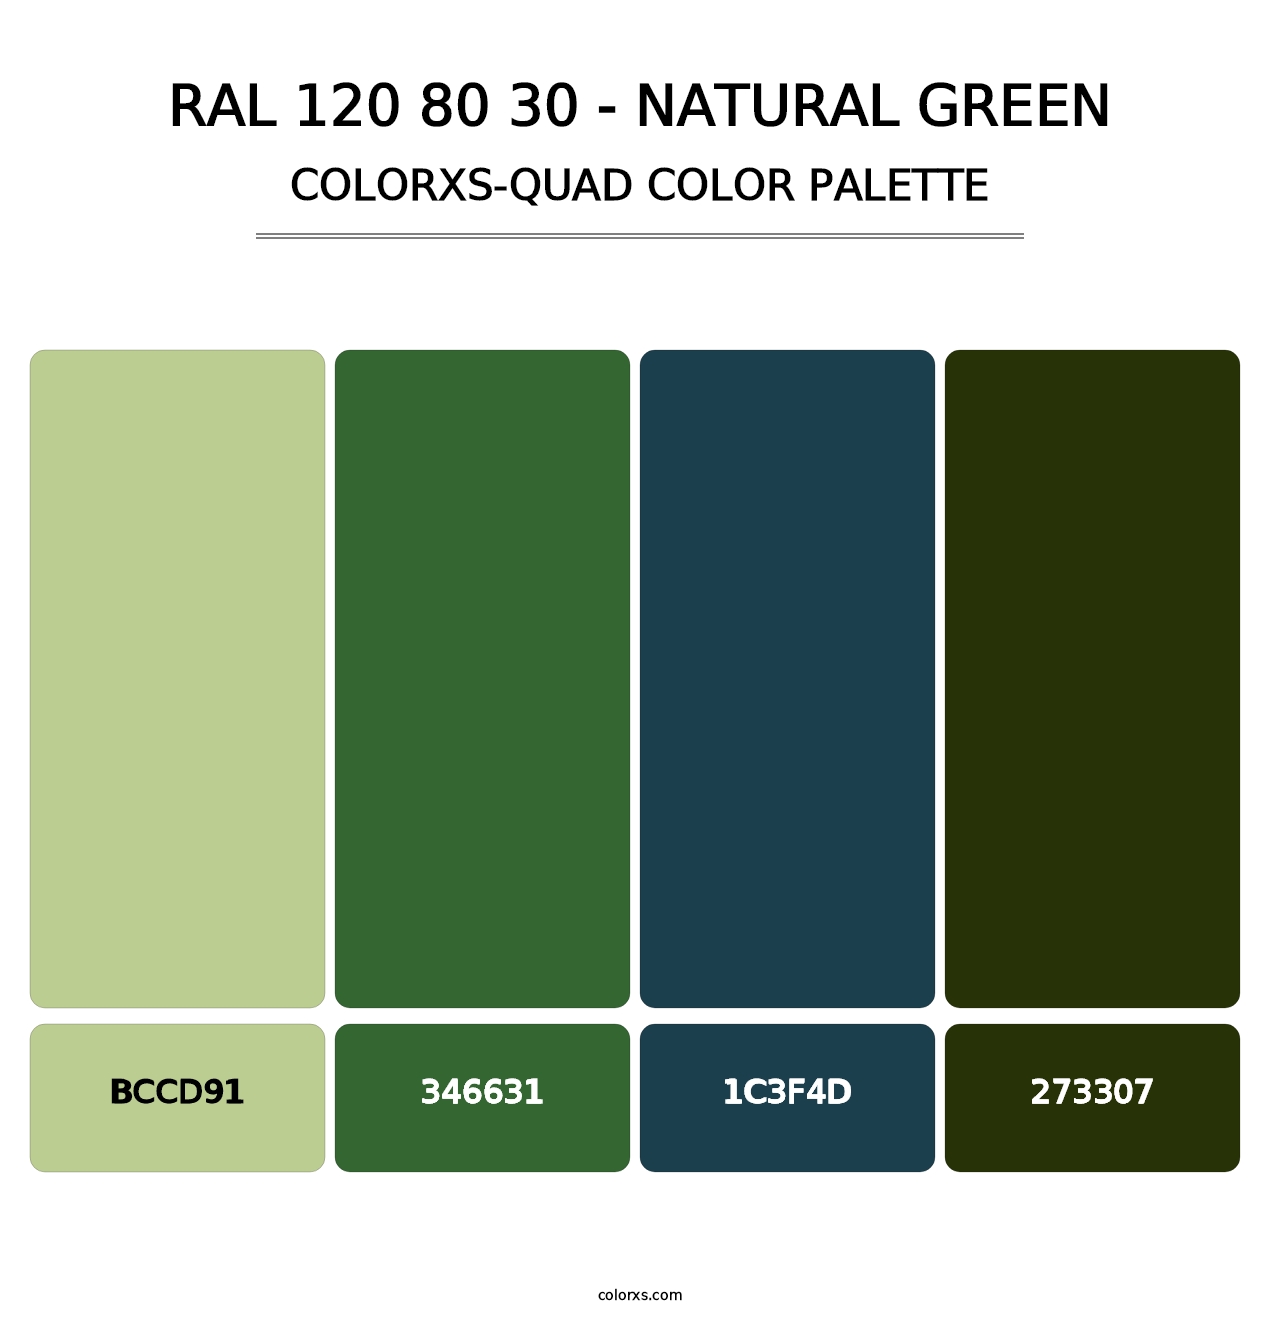 RAL 120 80 30 - Natural Green - Colorxs Quad Palette